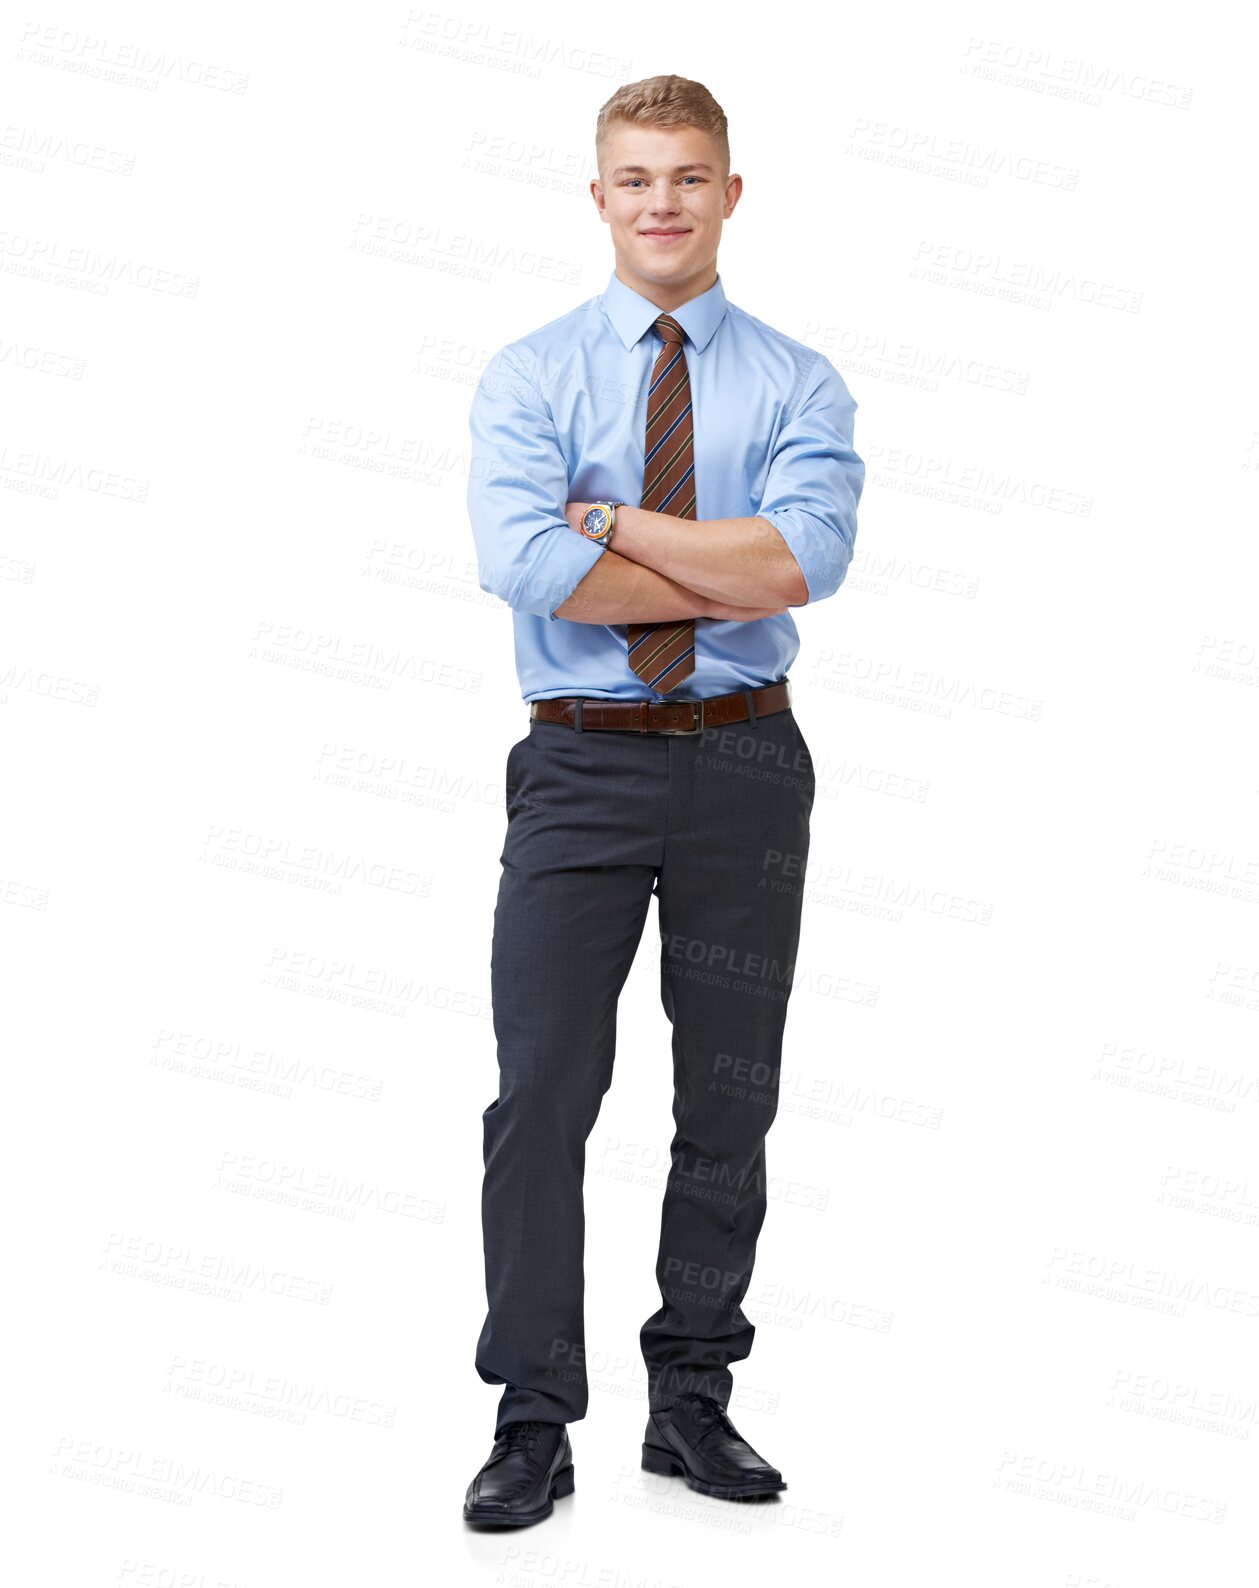 Buy stock photo Portrait, businessman or happy accountant with arms crossed isolated on transparent png background. Confidence, professional or pride of auditor, positive worker or smile for accounting success